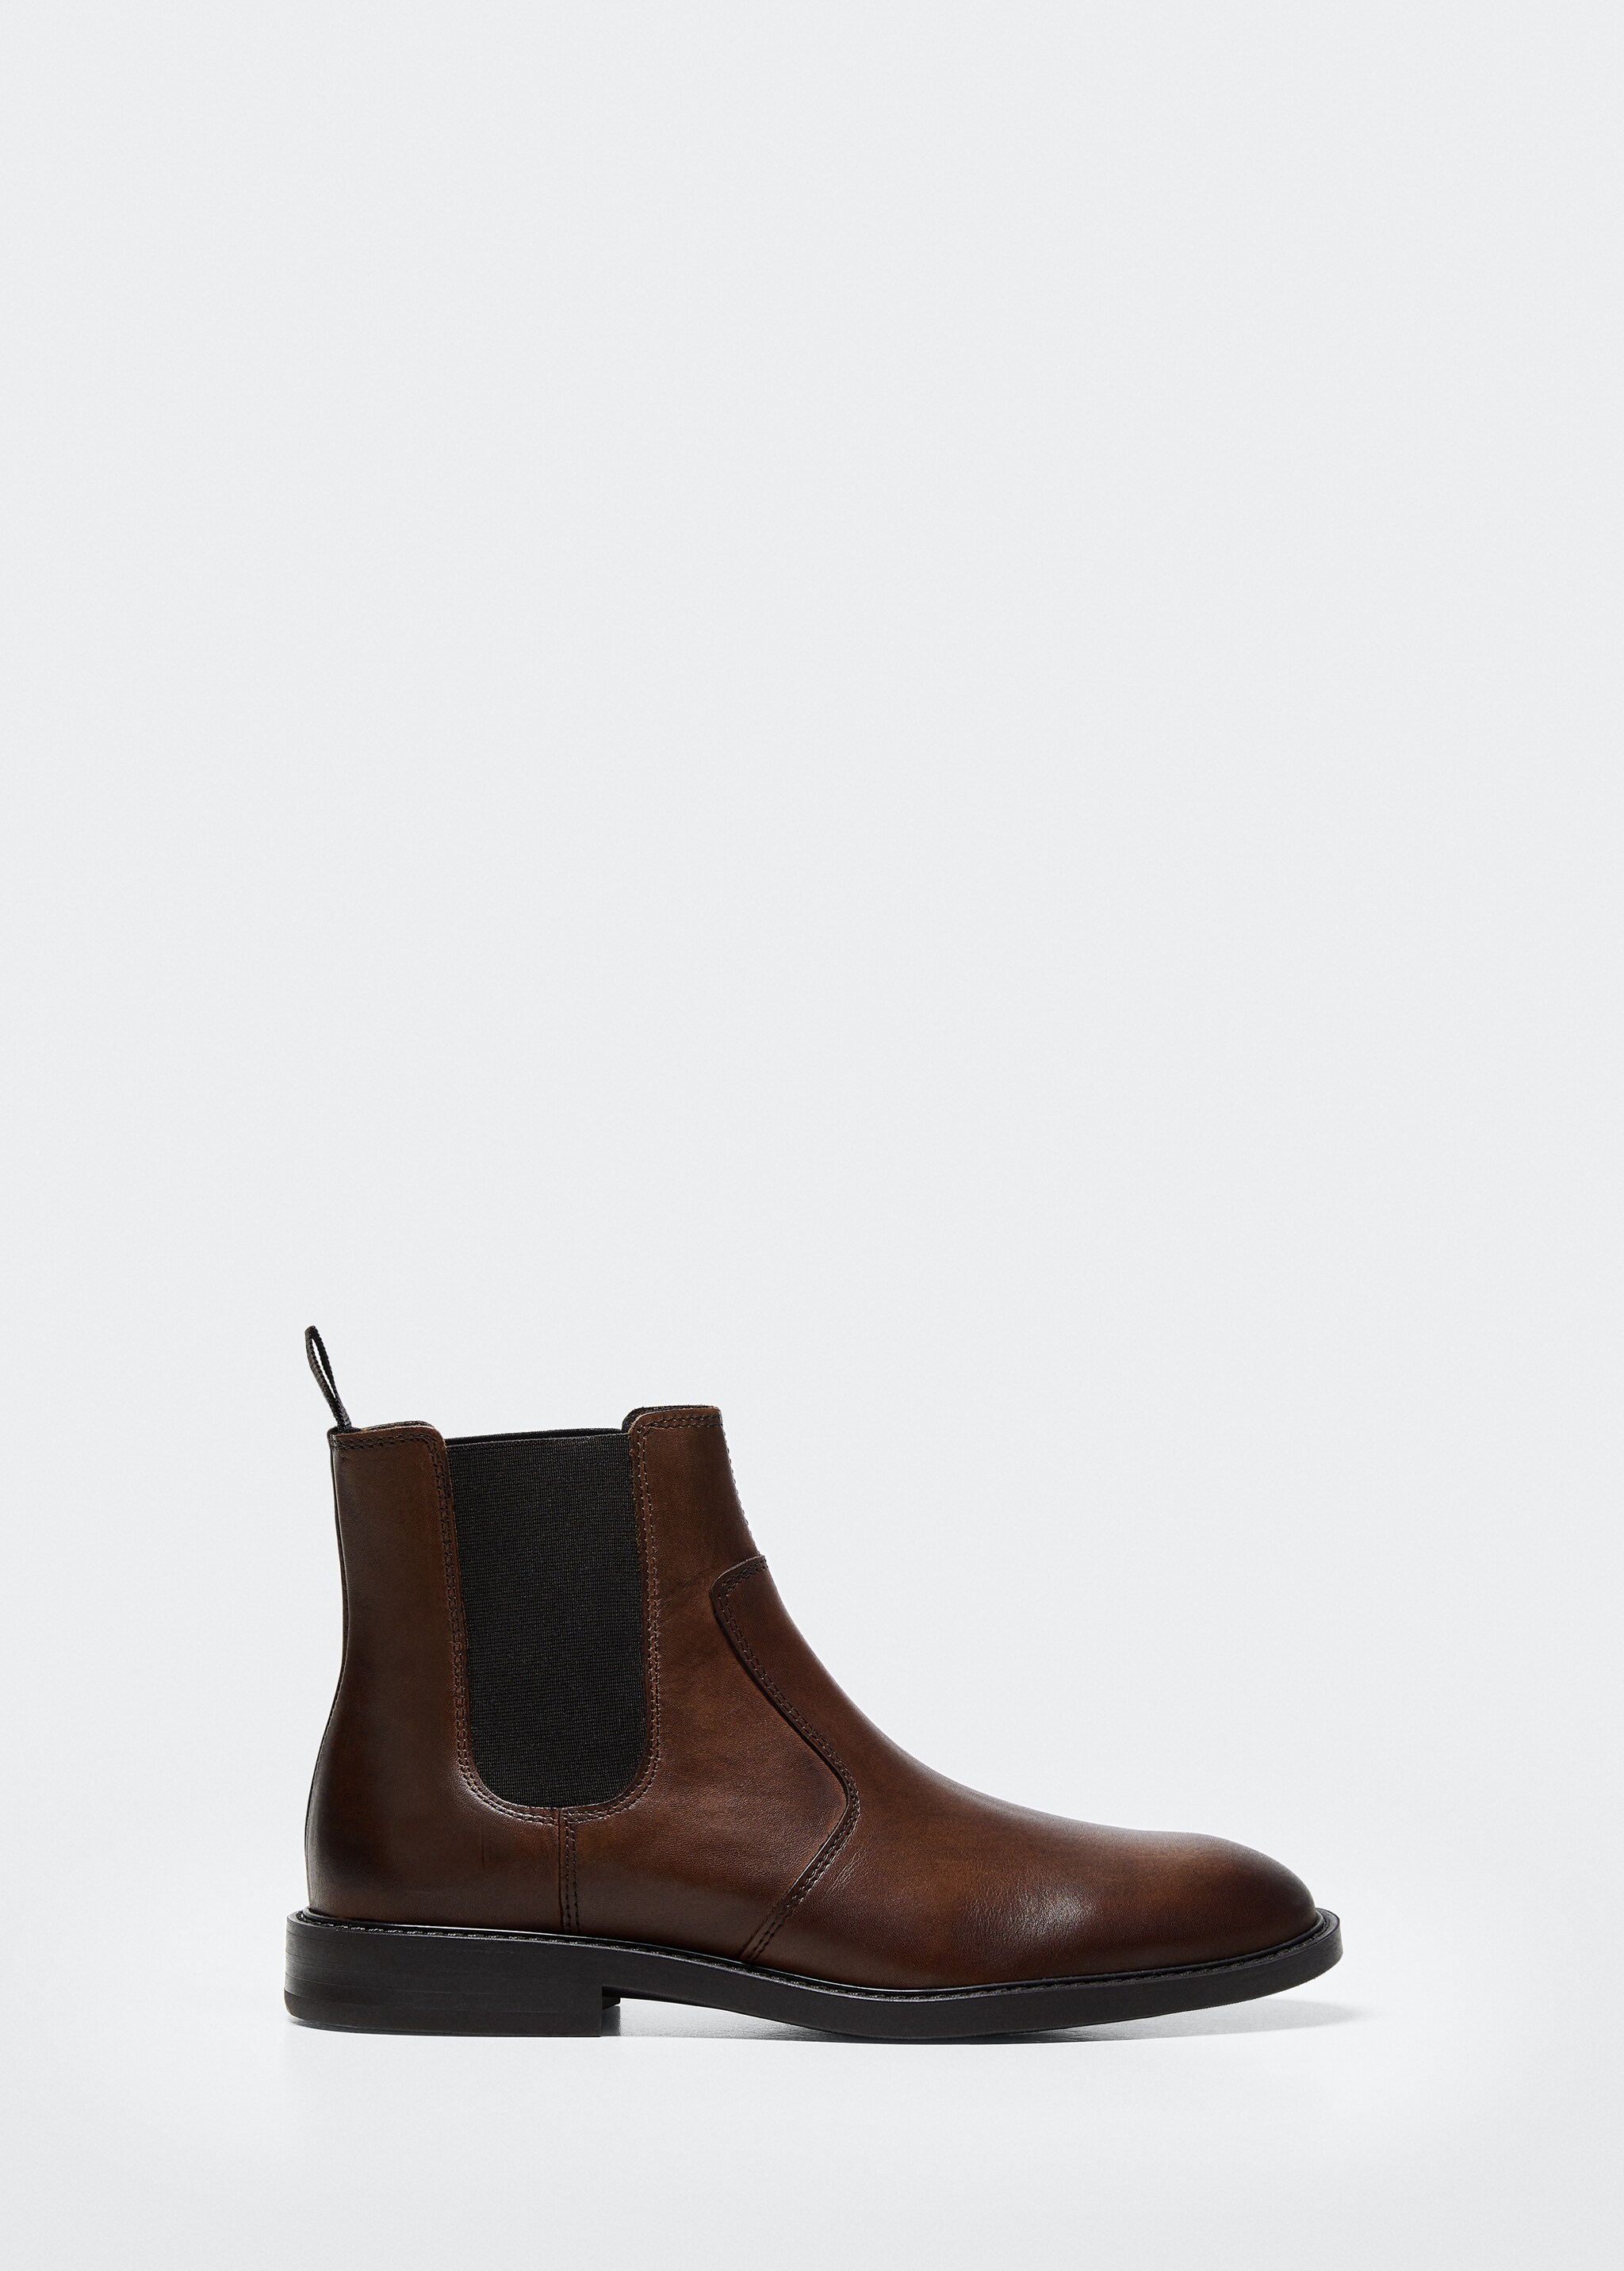 Leather Chelsea ankle boots - Article without model